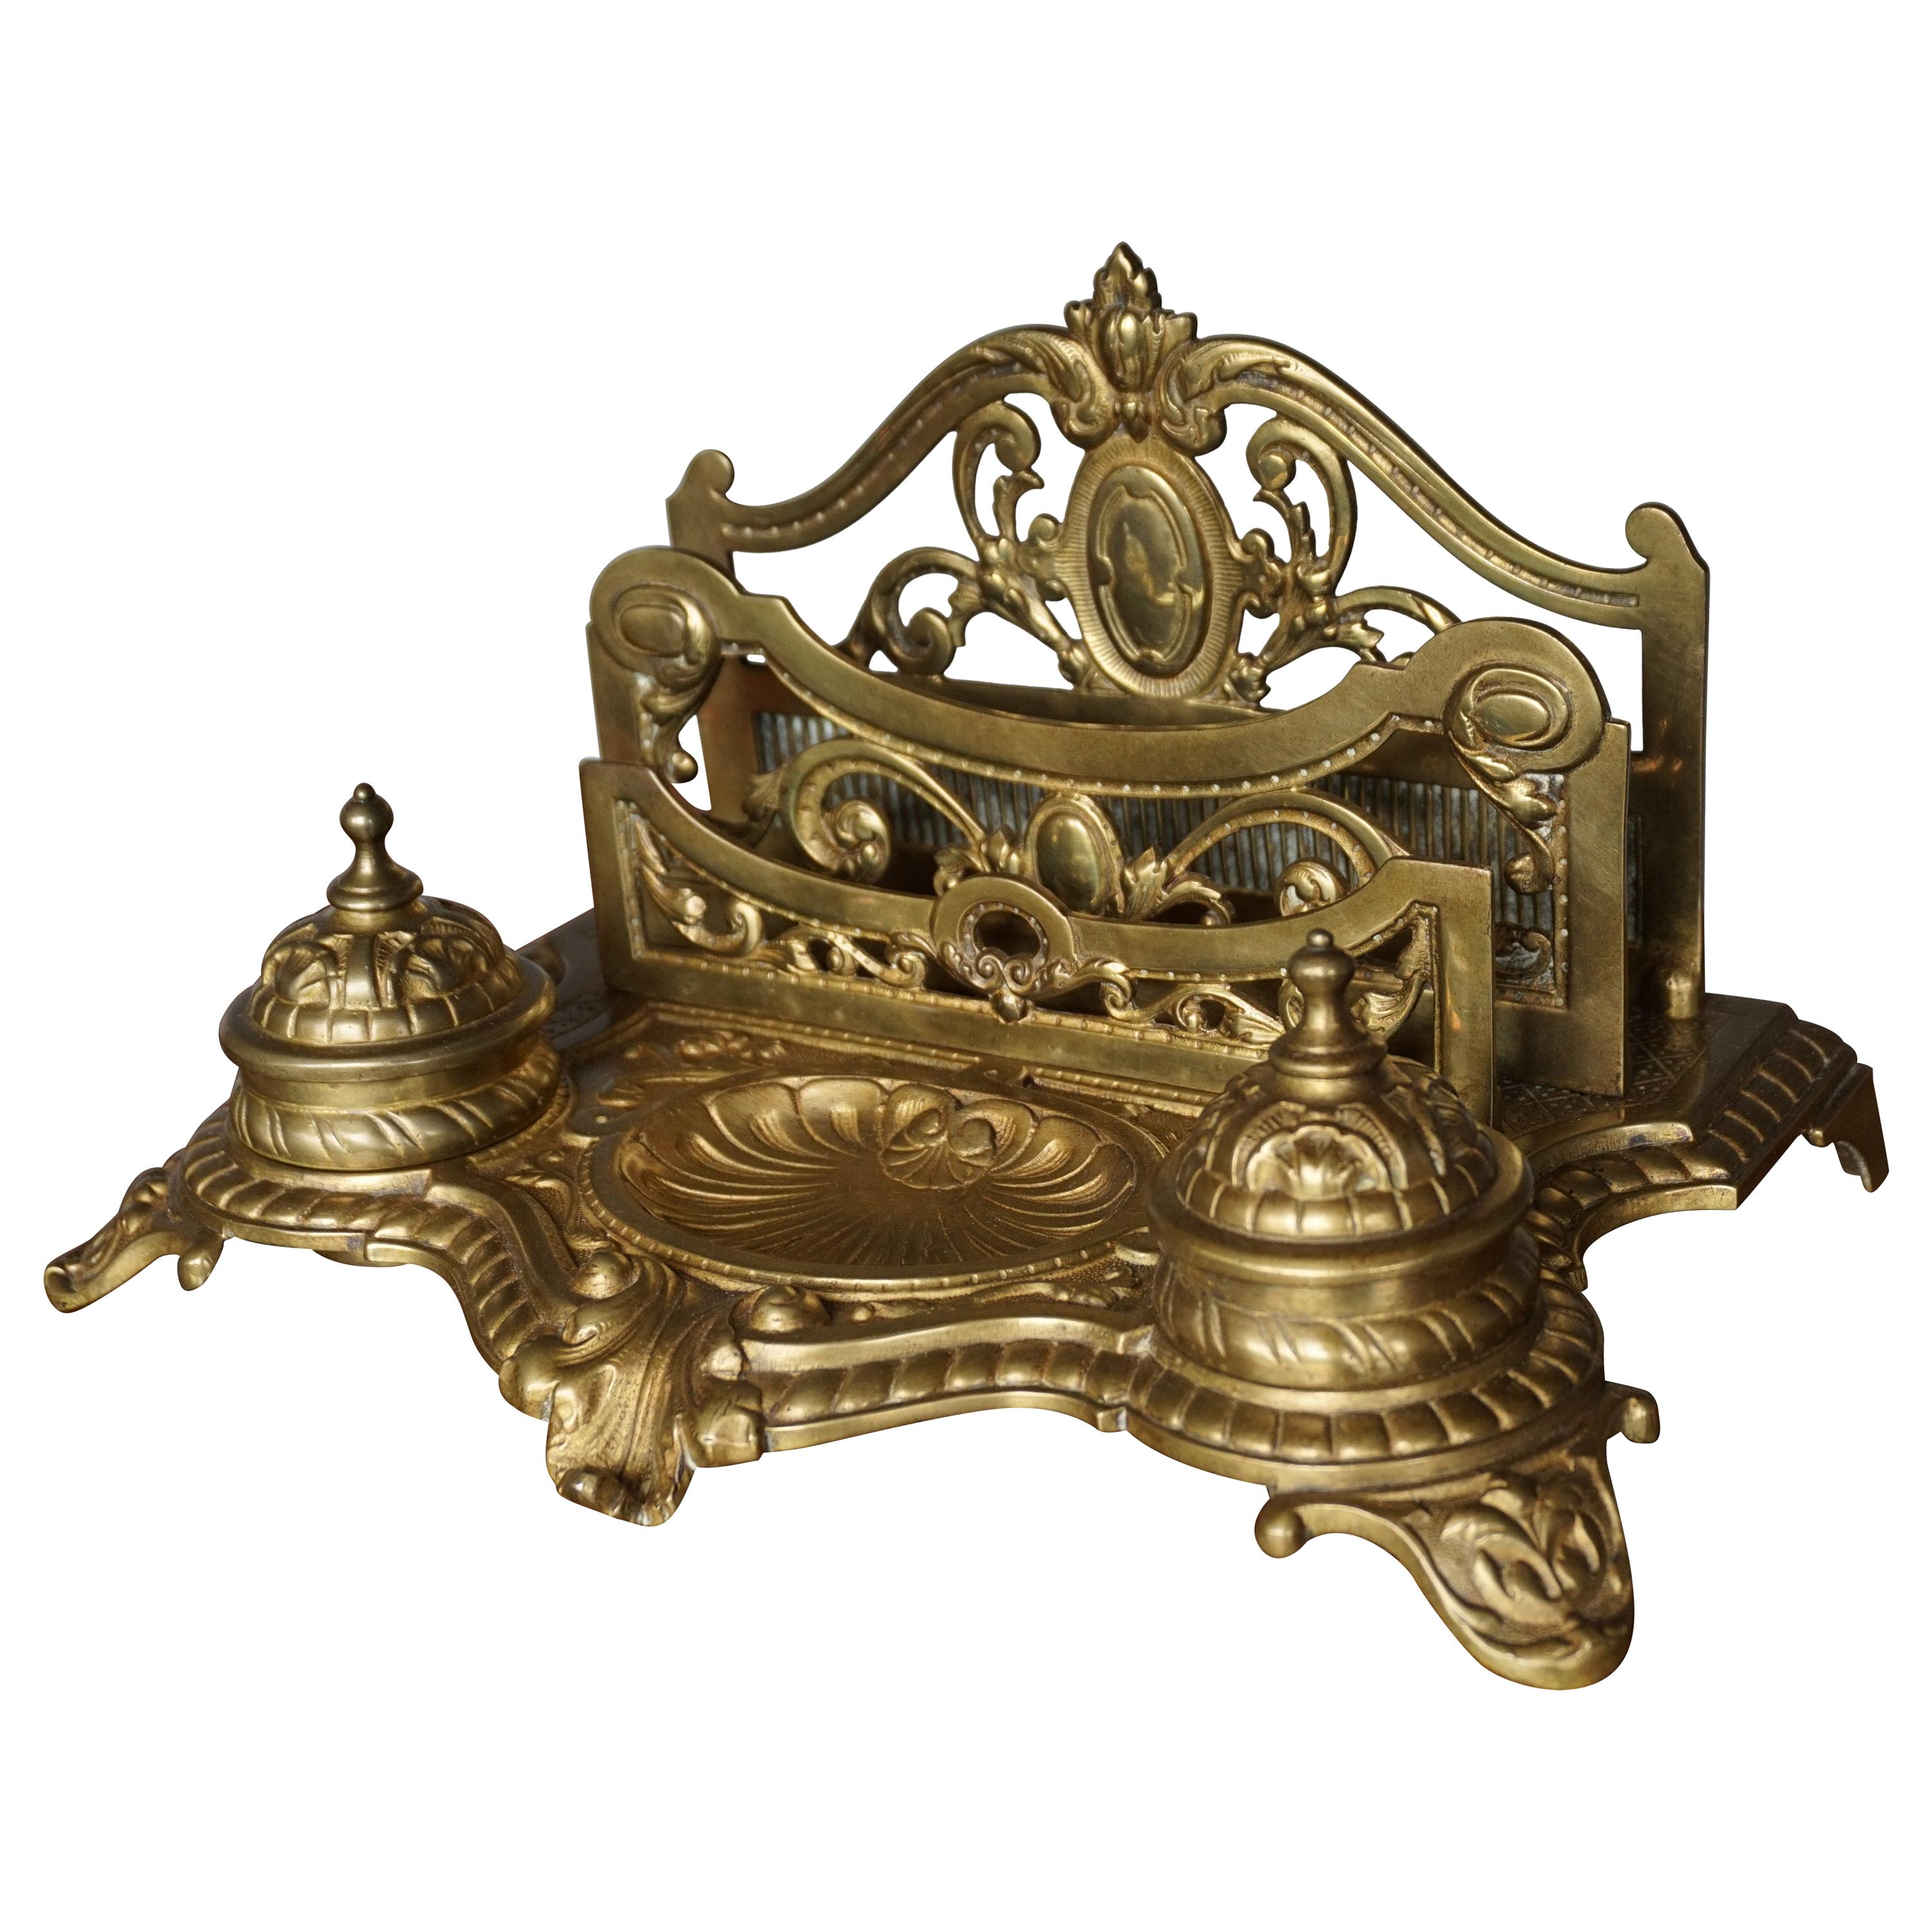 Large Bronze Desk Stand with Inkwells Letter Rack and Porcelain Ink Holders